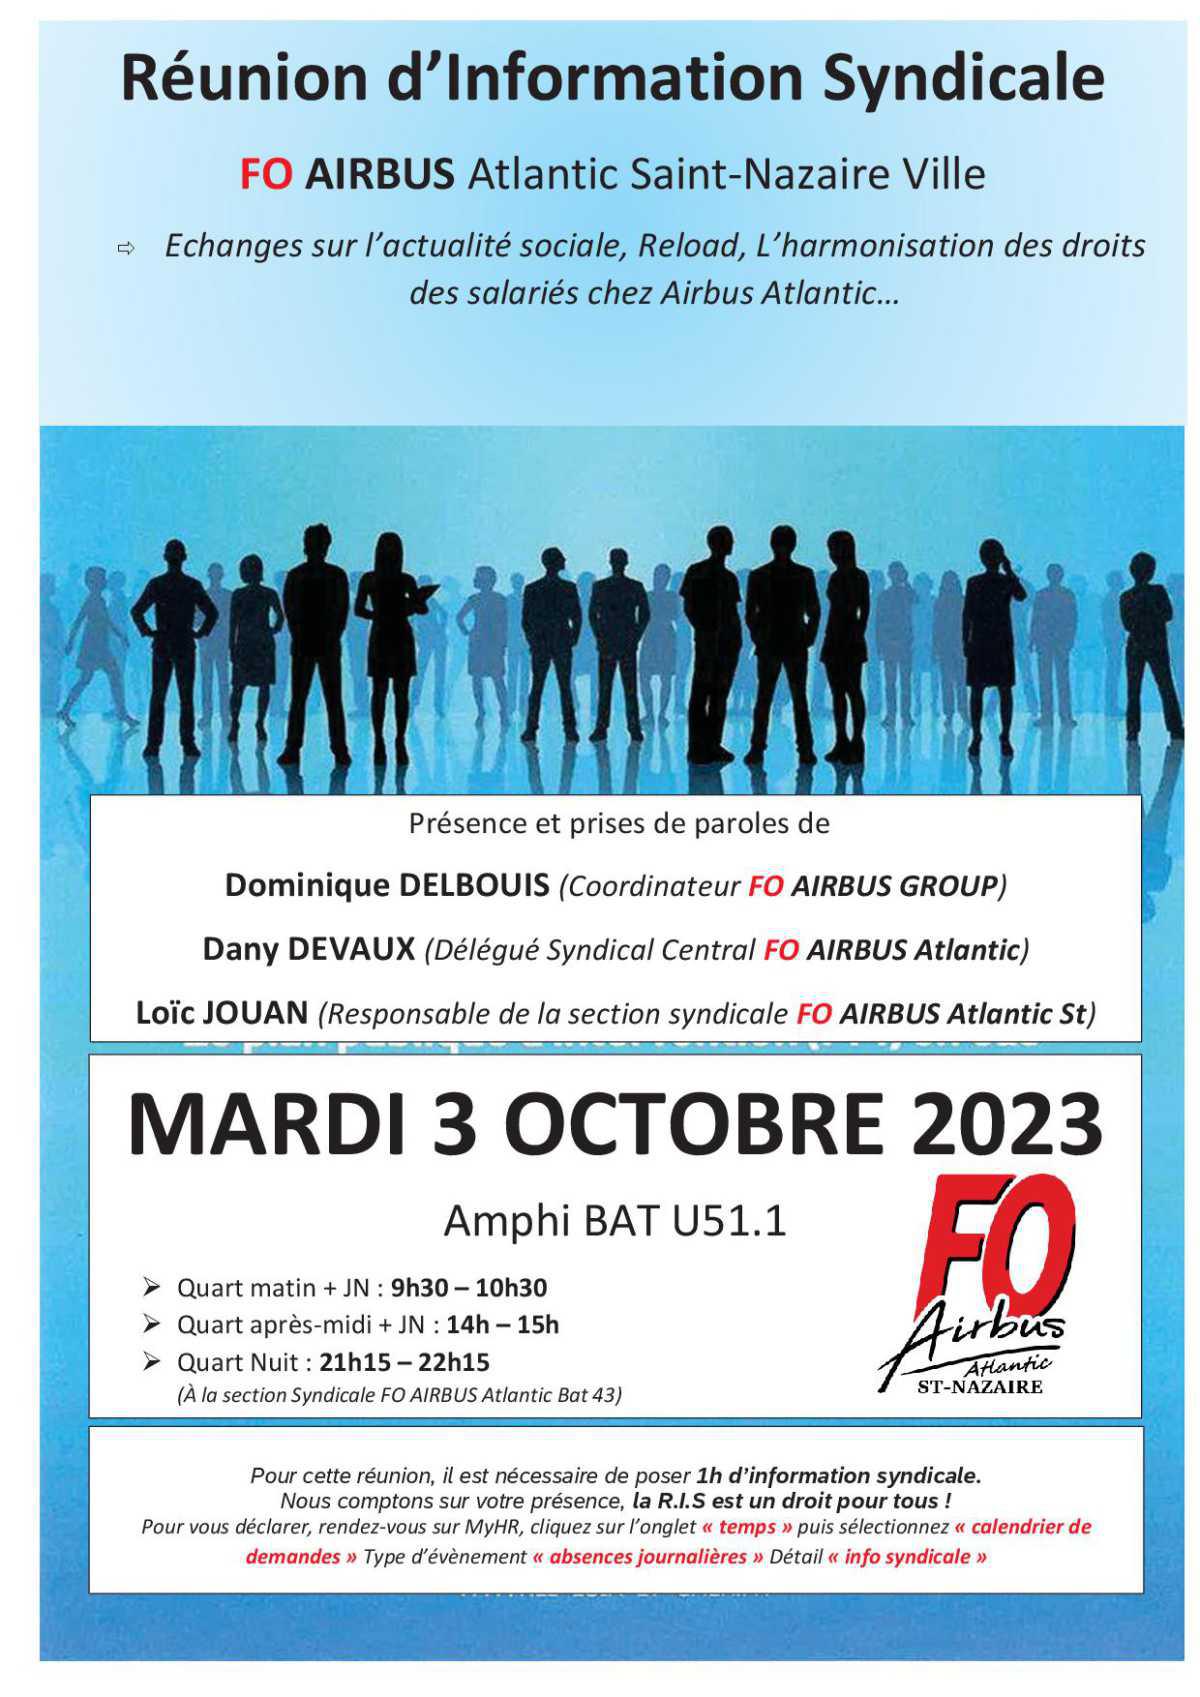 REUNION D'INFO SYNDICALE